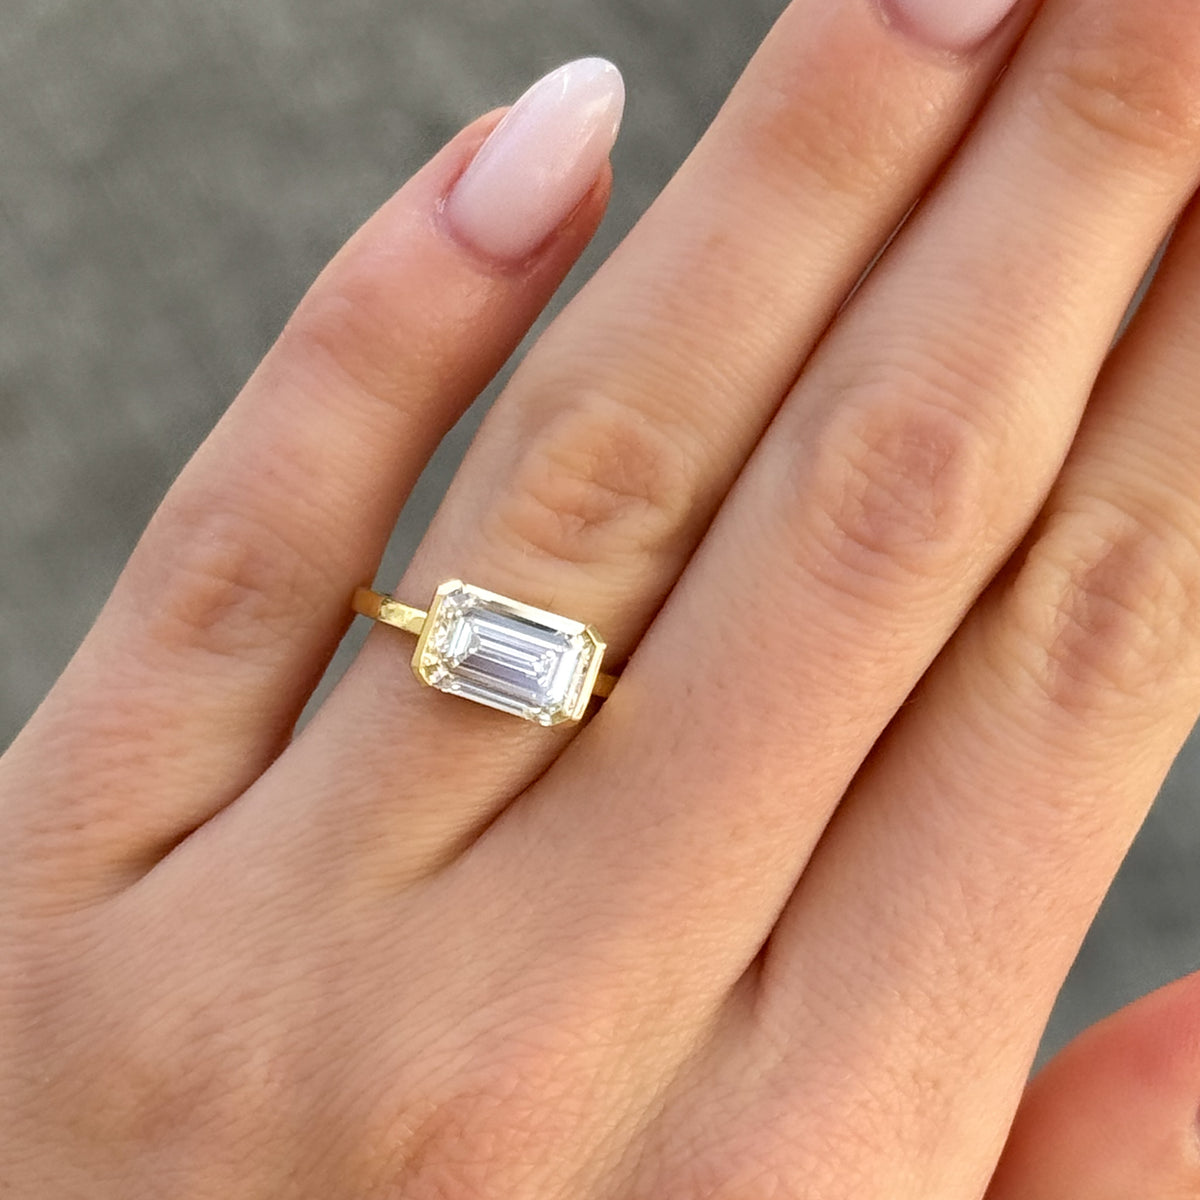 East West Half Bezel Solitaire Engagement Ring With Emerald Cut Diamond